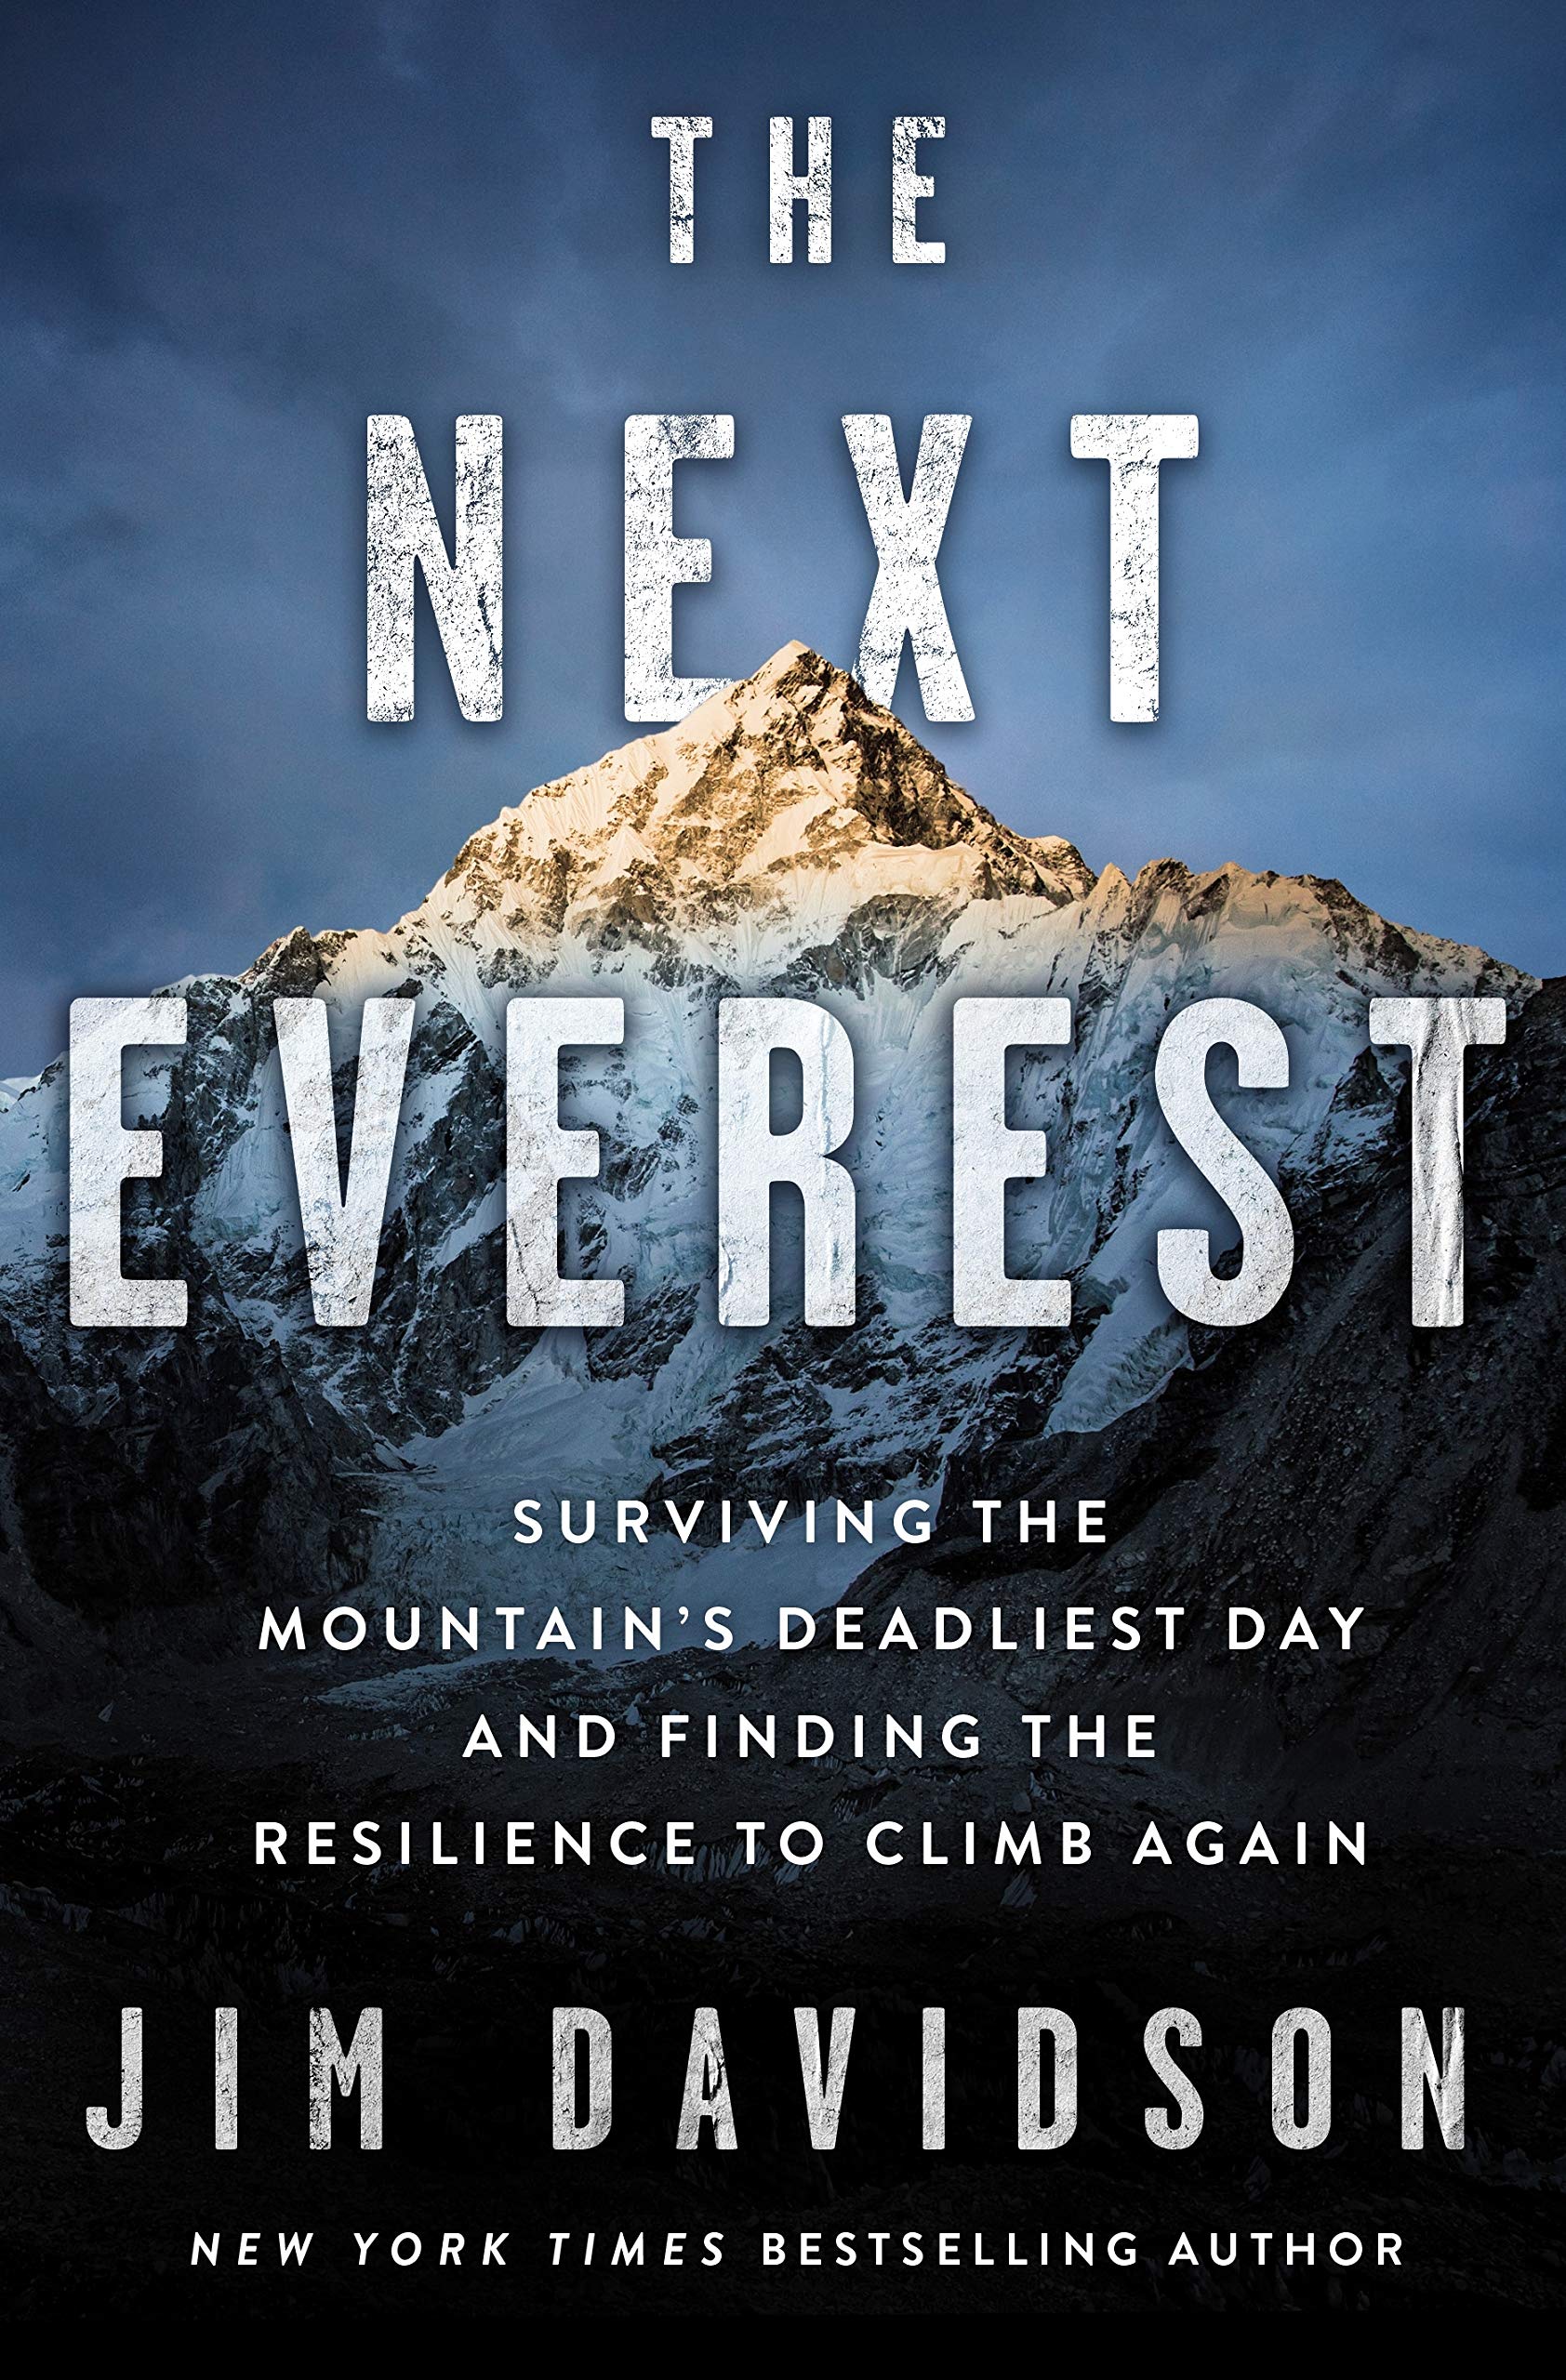 Image for "The Next Everest"